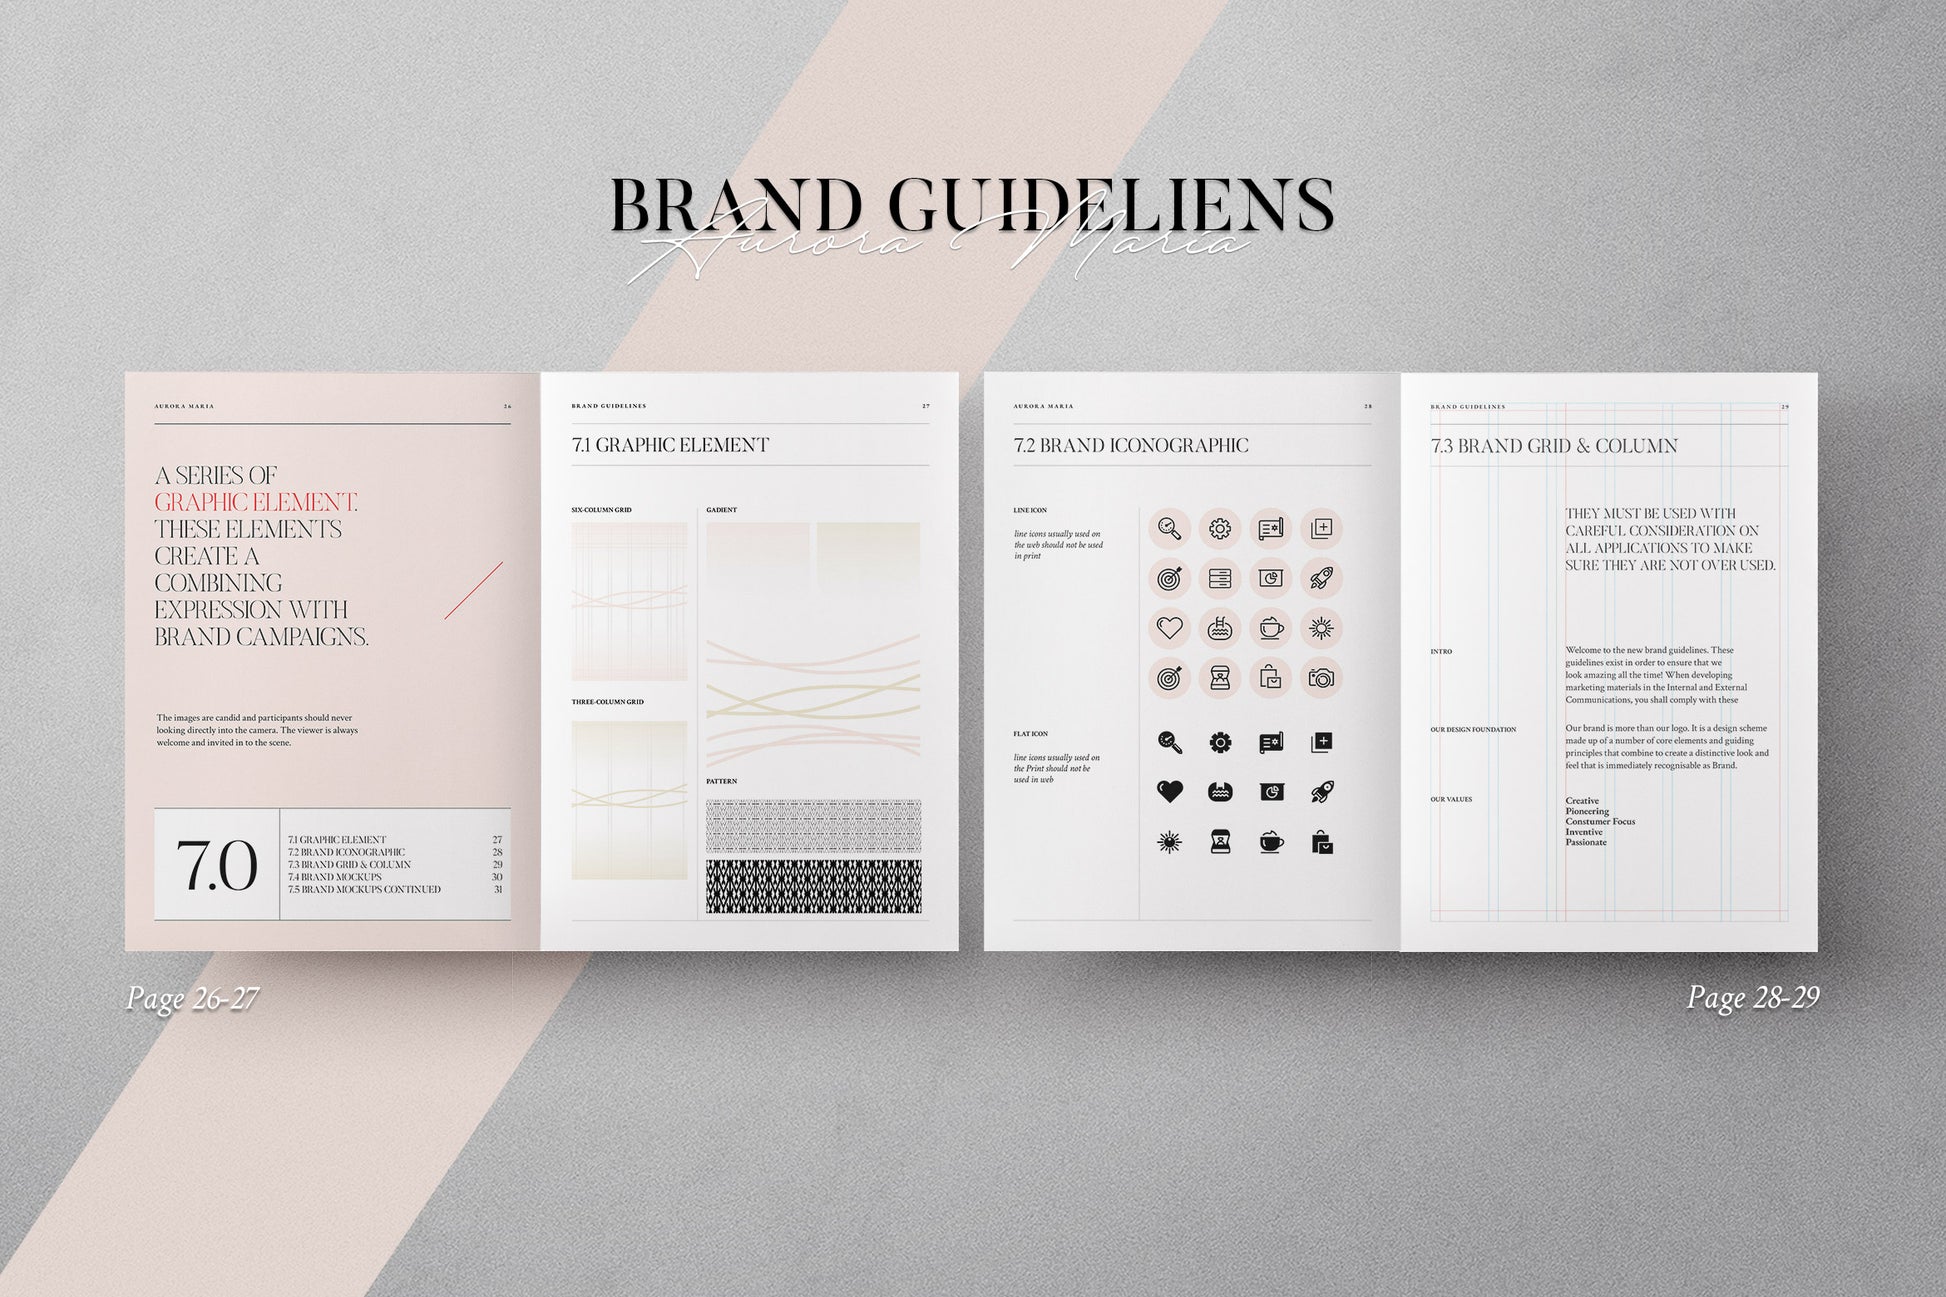 Aurora - brand identity, guideline and assets.